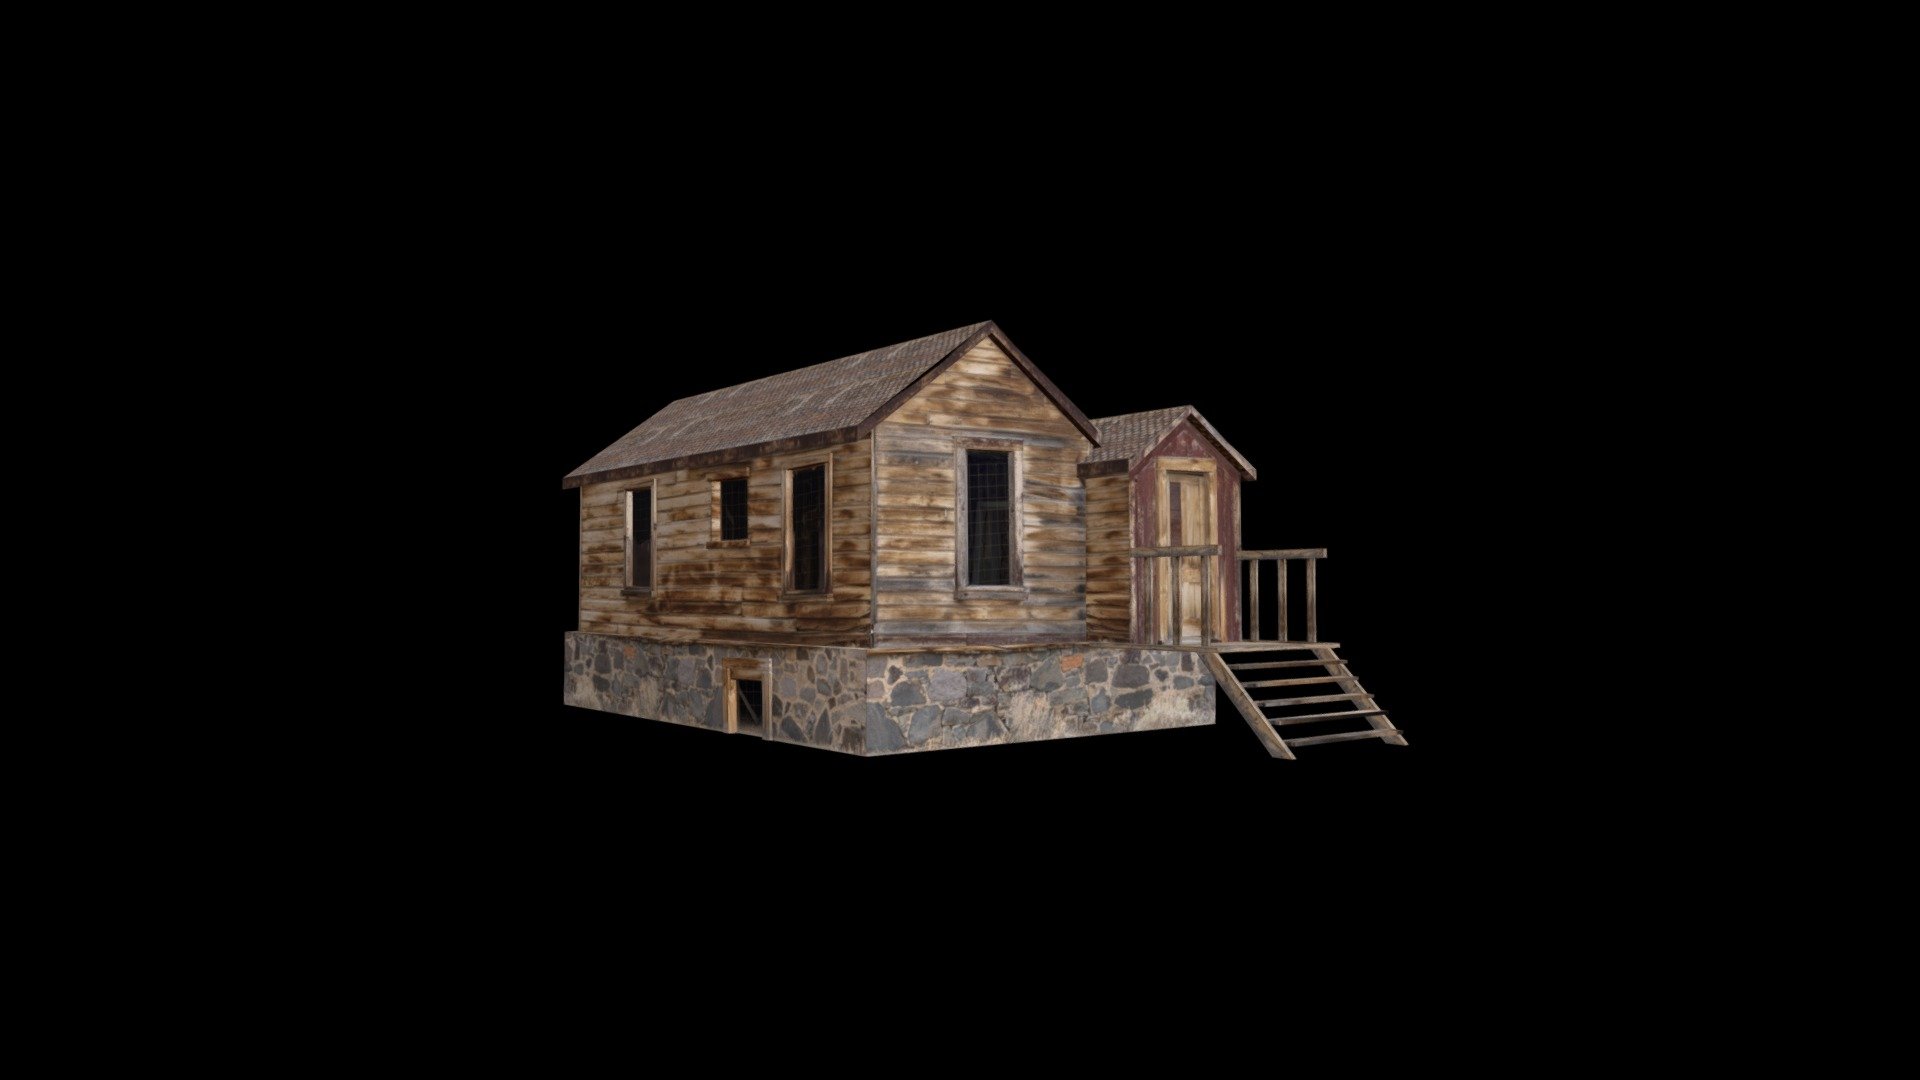 3D Low Poly Western Big Wooden House
High Quality
Photorealistic
Game Ready
Mobile Ready
2 HD Textures:
UV_Map_01 - 1024x1024 pixels
UV_Map_02 - 1024x1024 pixels
 - Western Big Wooden House Low Poly - Buy Royalty Free 3D model by yxungsauce2 3d model